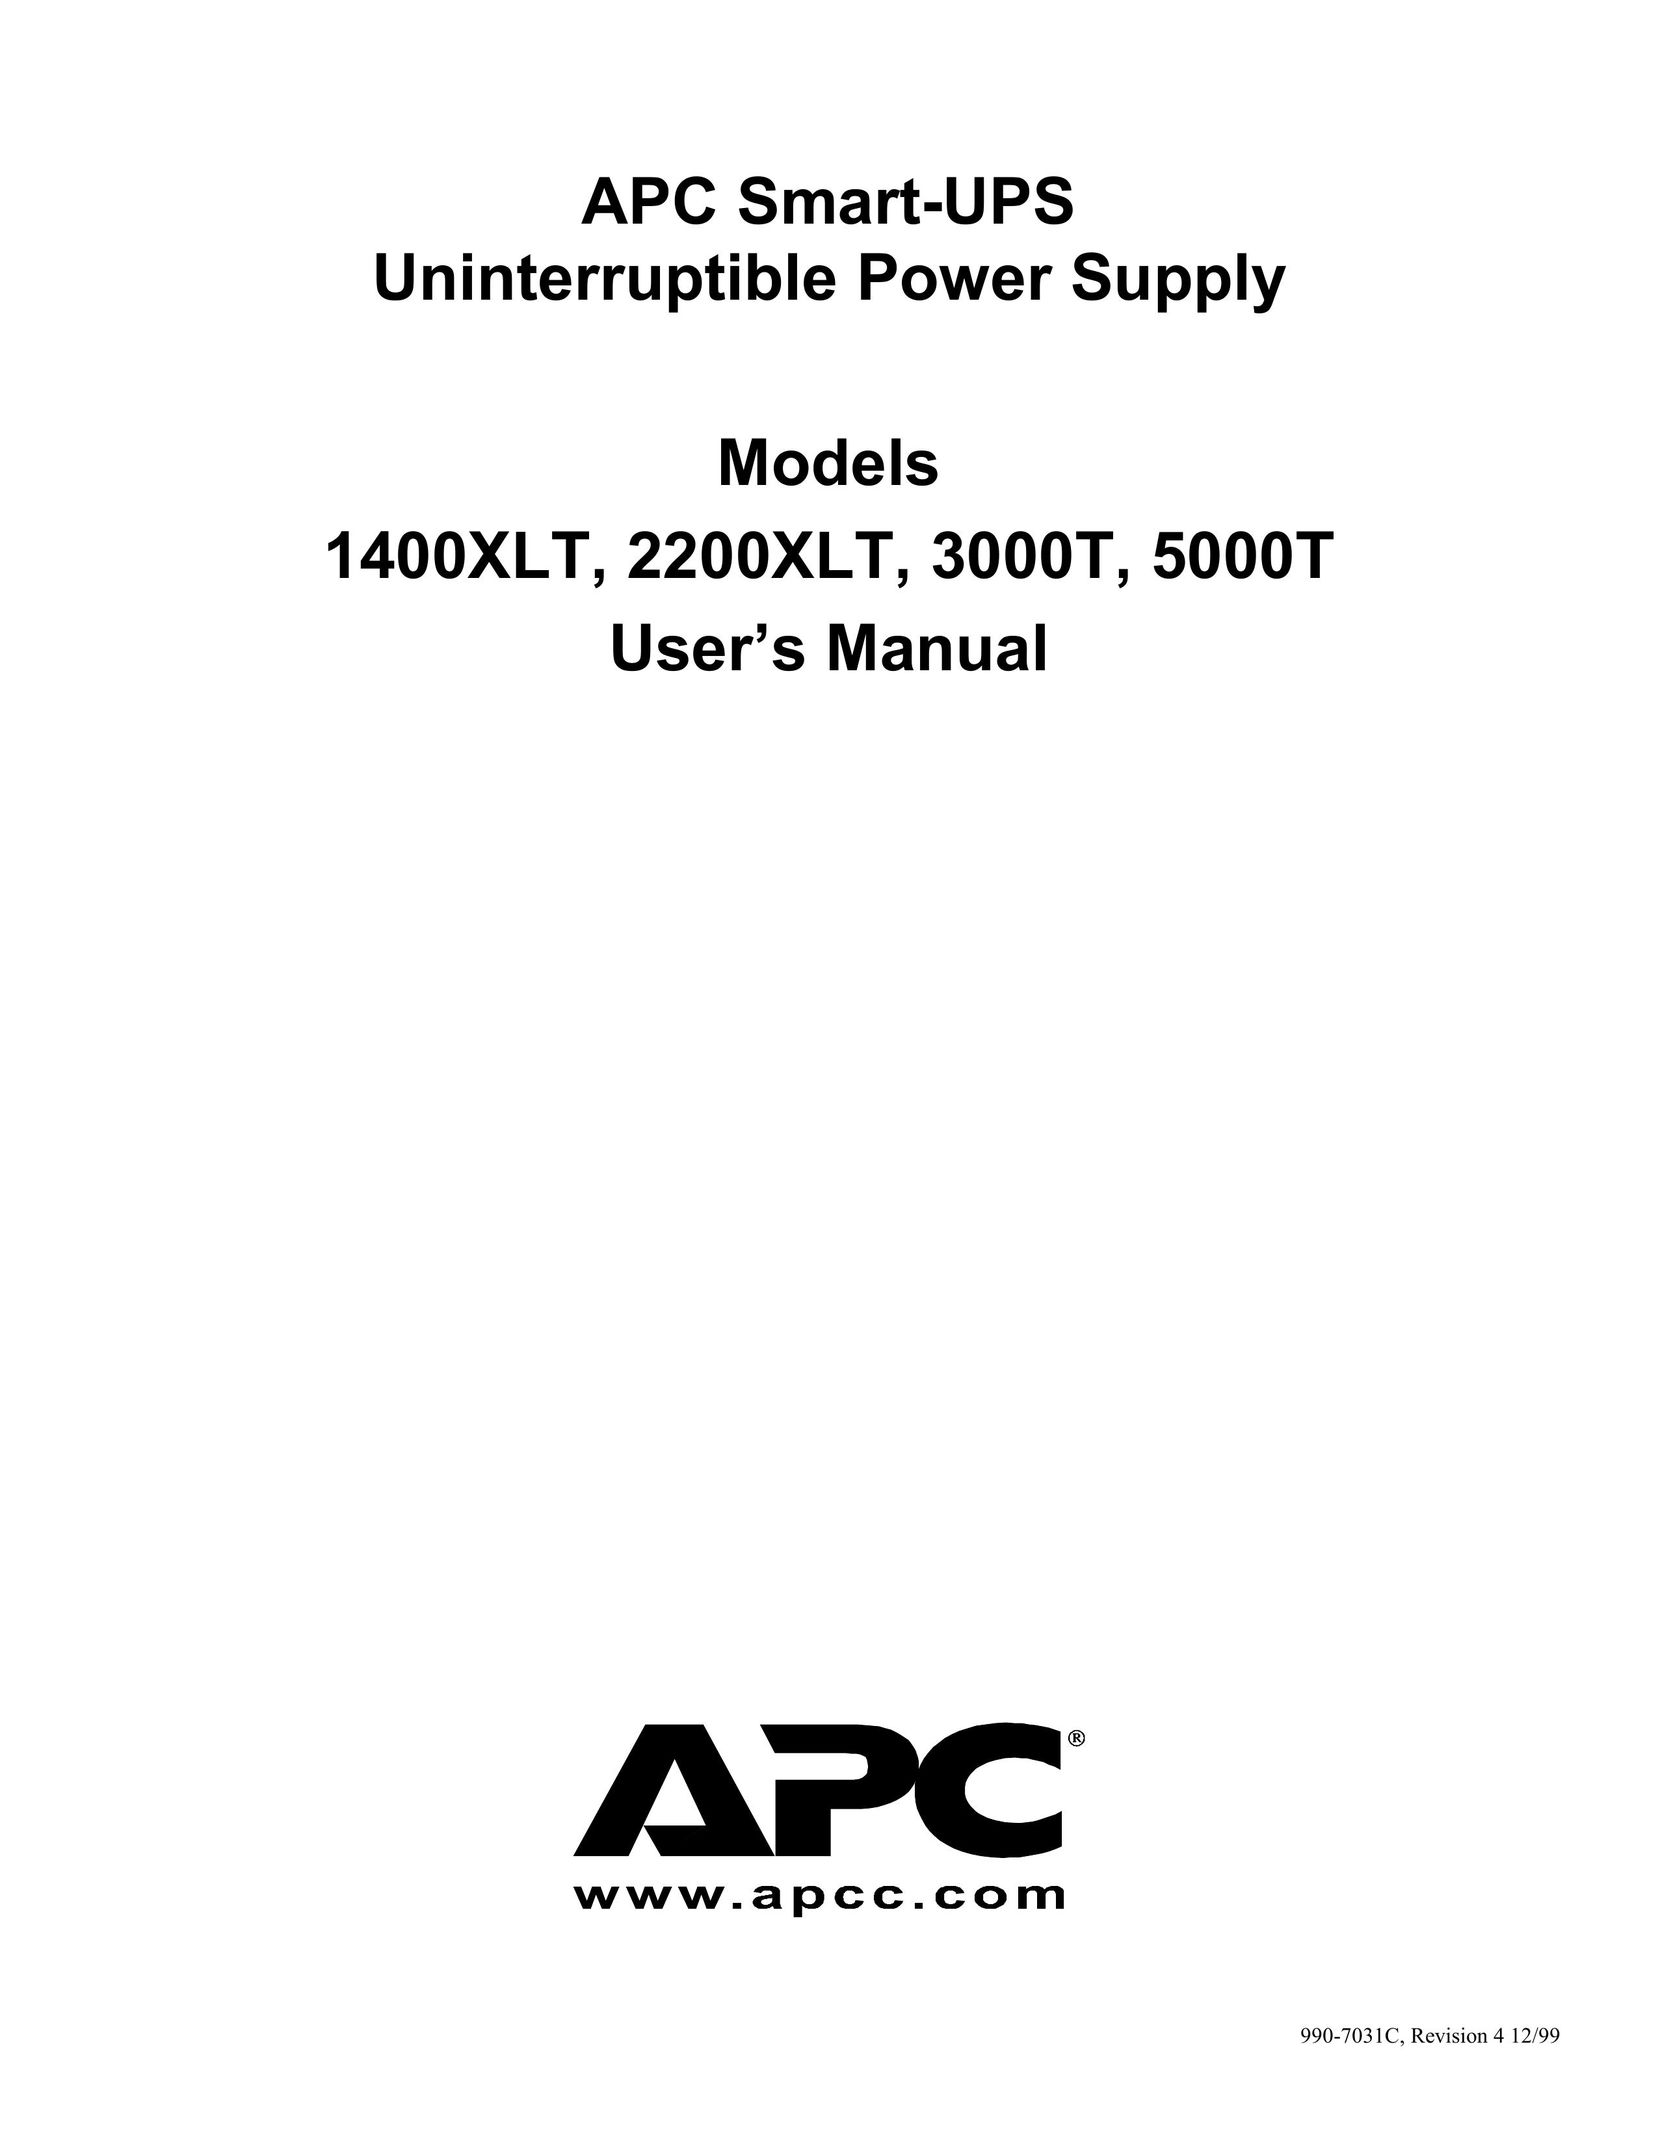 American Power Conversion 2200XLT Power Supply User Manual